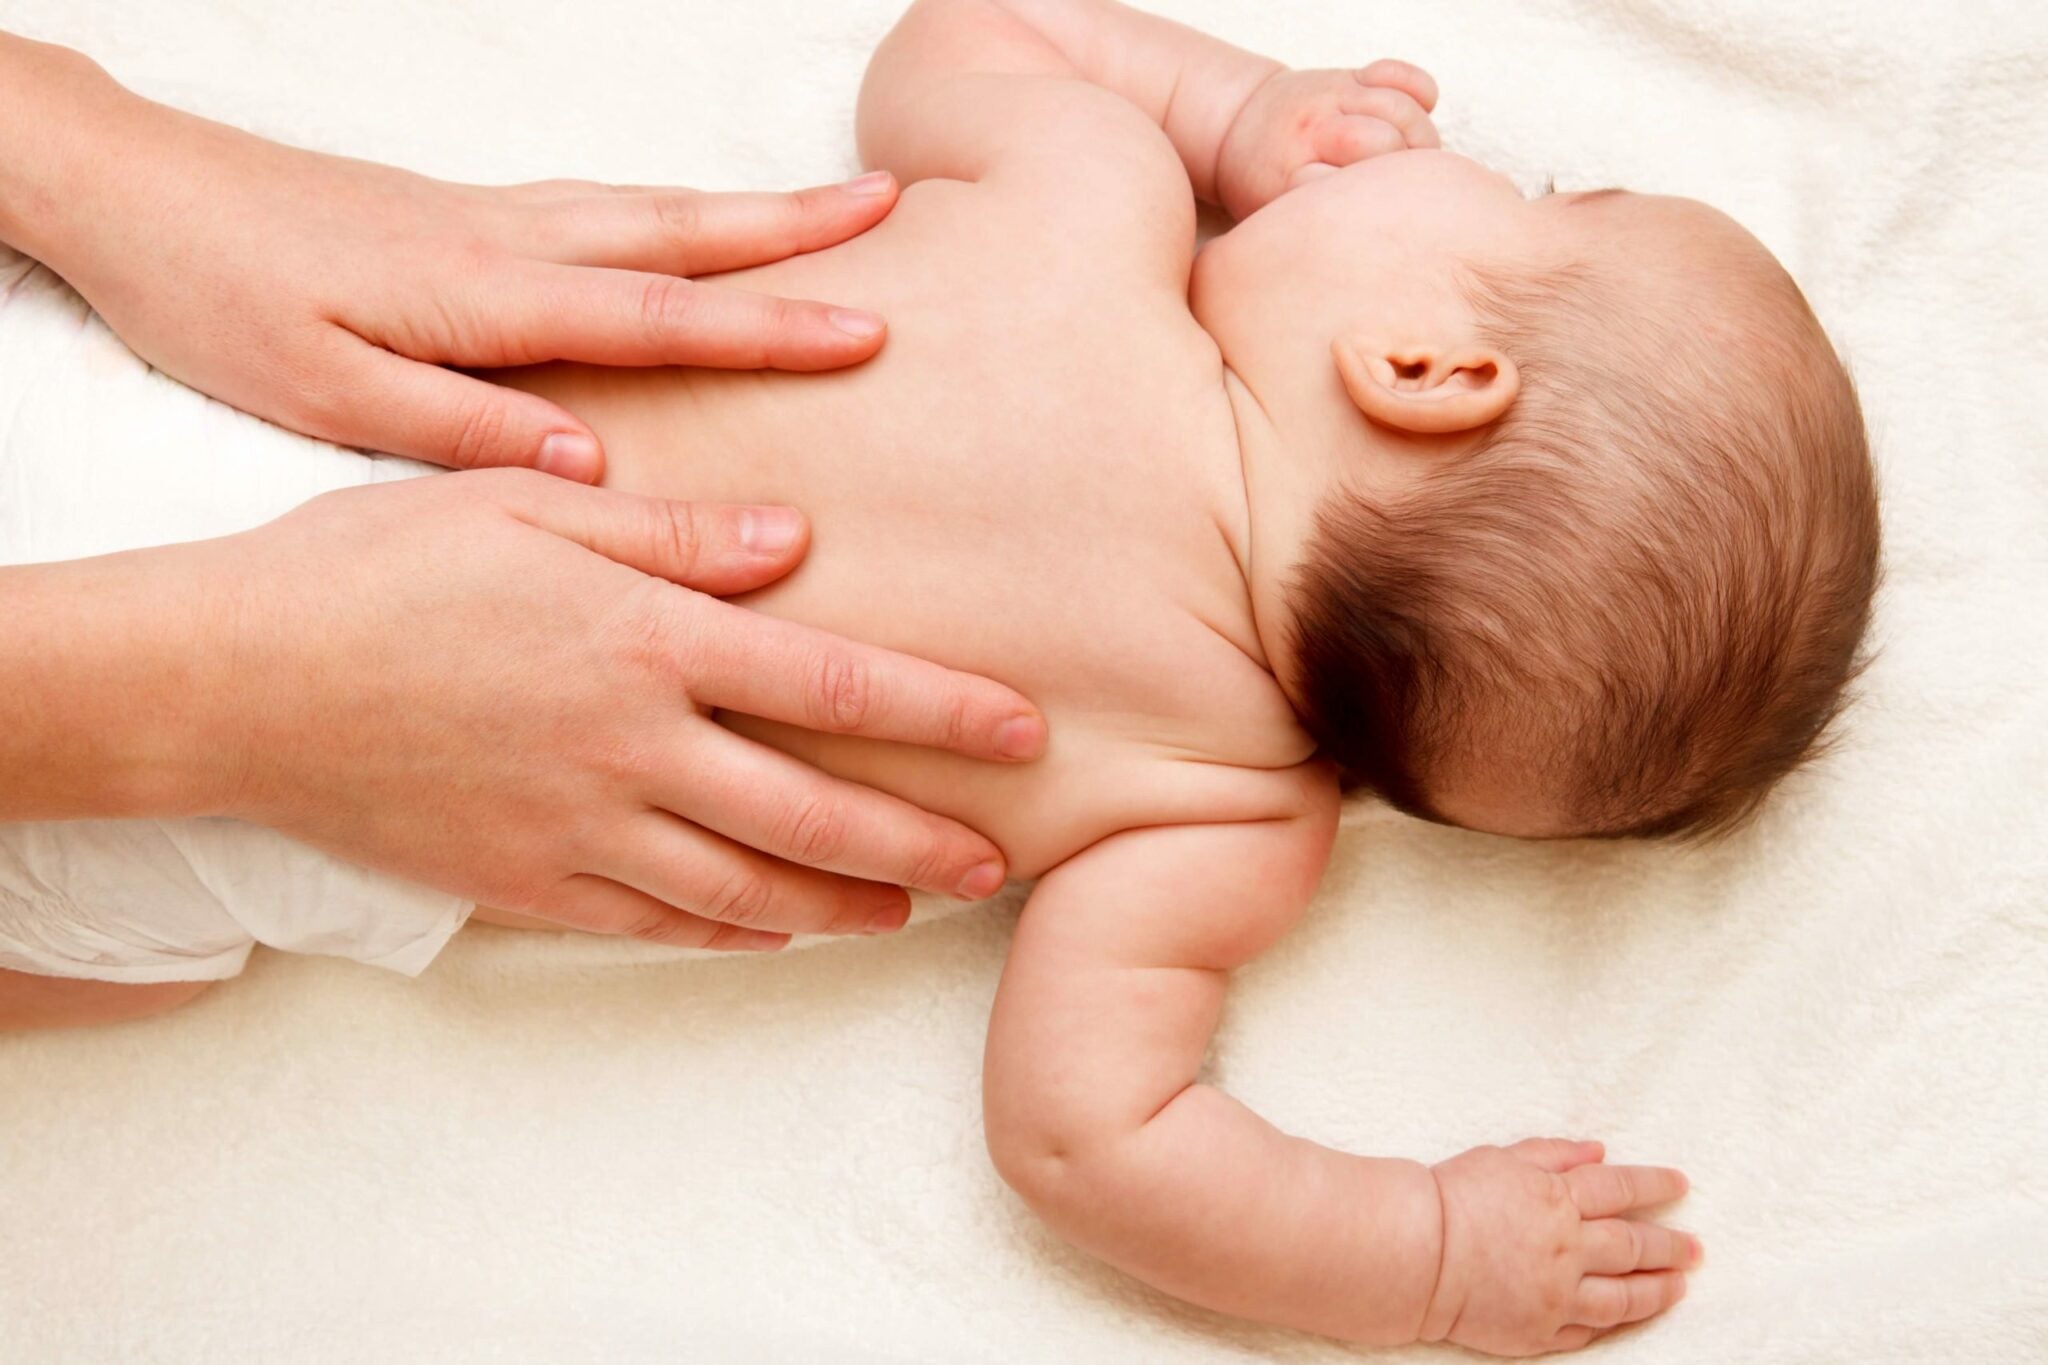 WHAT ARE THE ADVANTAGES OF BABY MASSAGE FOR BOTH YOU AND YOUR INFANT?